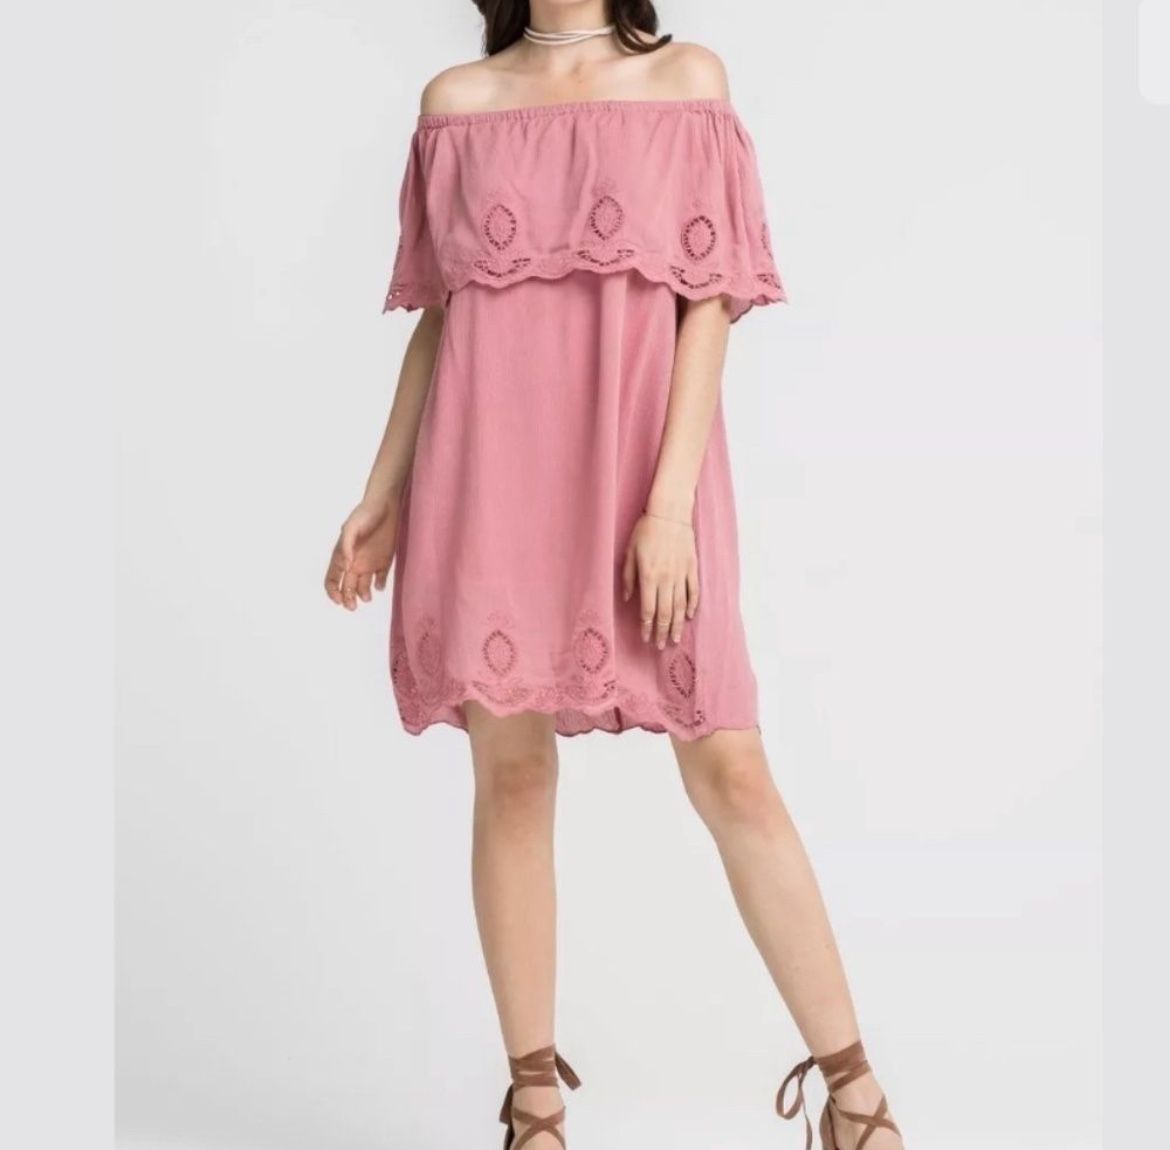 NEW Lush Pink Off-the-Shoulder Dress Size Small